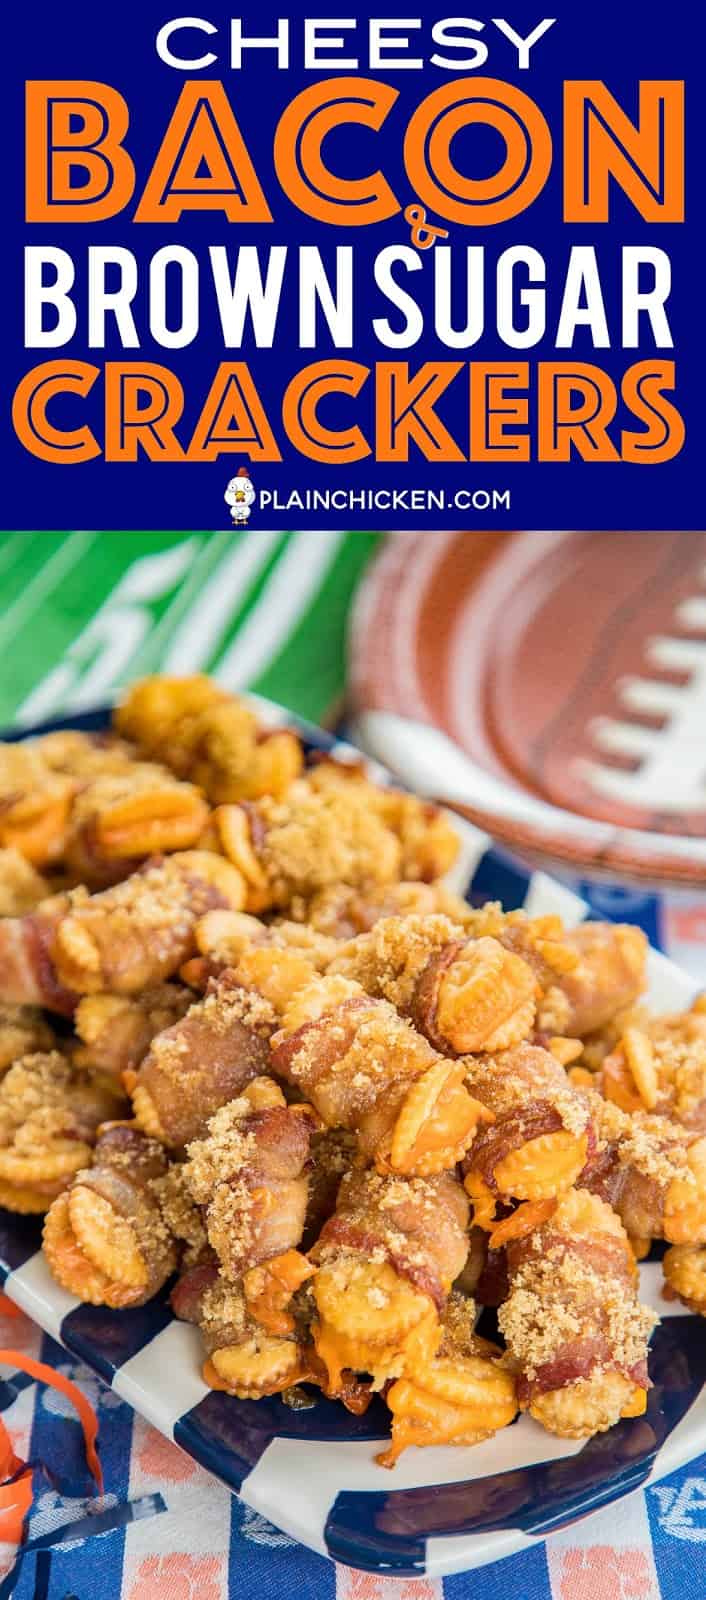 Cheesy Bacon and Brown Sugar Crackers - so good! You can't eat just one!!! Townhouse crackers stuffed with cheddar cheese, wrapped in bacon and topped with brown sugar. These are always a hit at parties!!! Sweet and Savory in every bite! #bacon #appetizers #tailgating